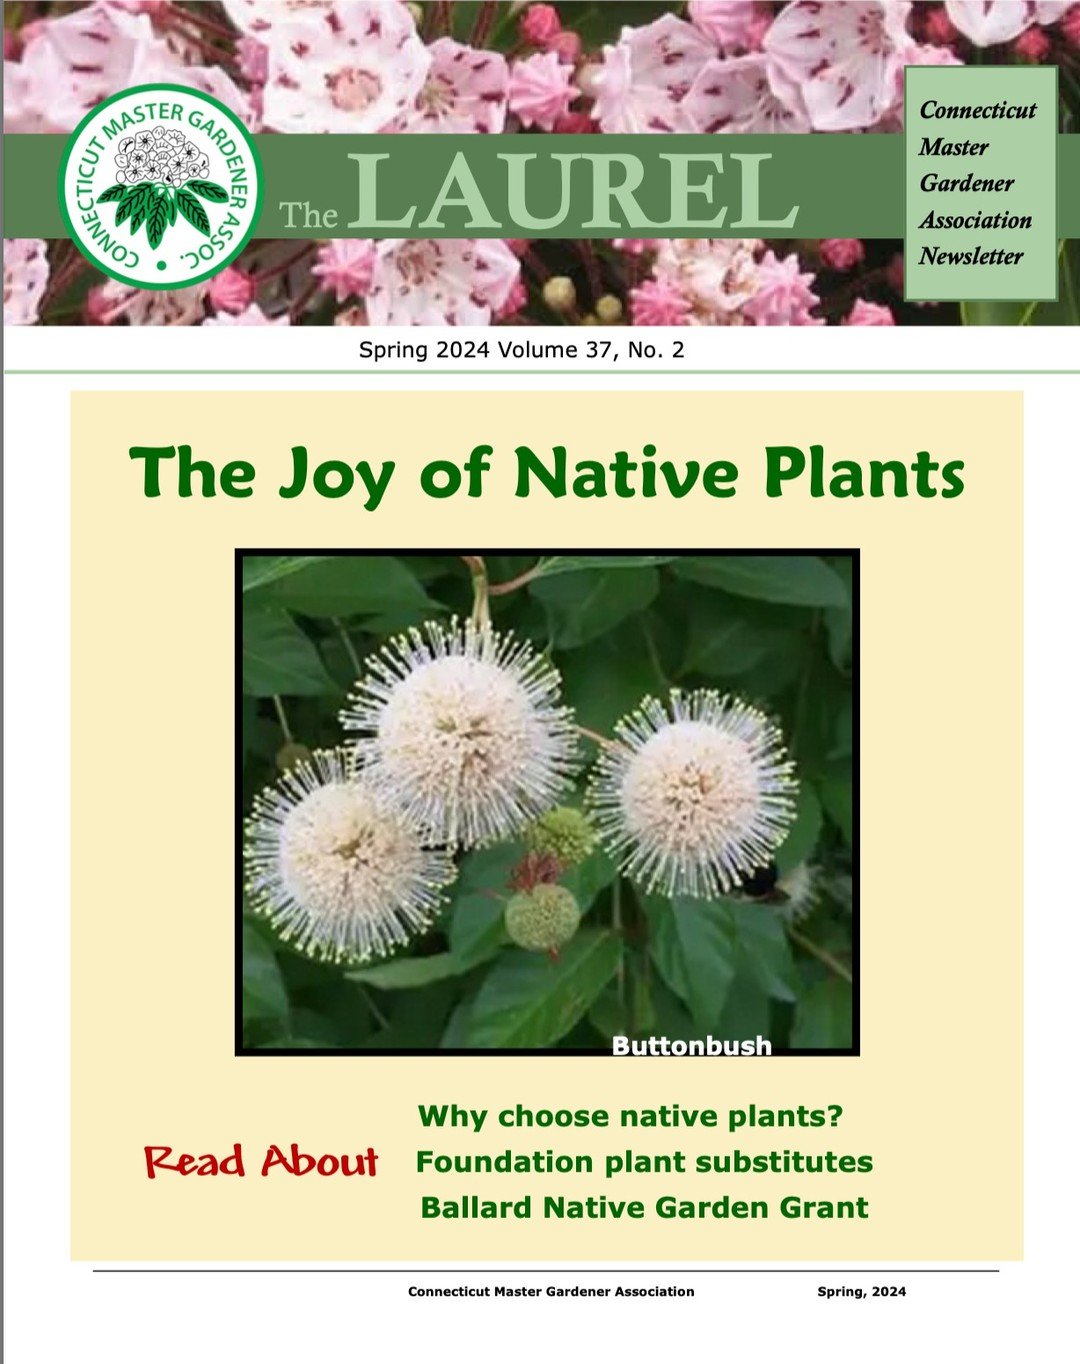 Extra, extra! Read the CMGA Laurel, on our website today! https://ctmga.org/newsletter